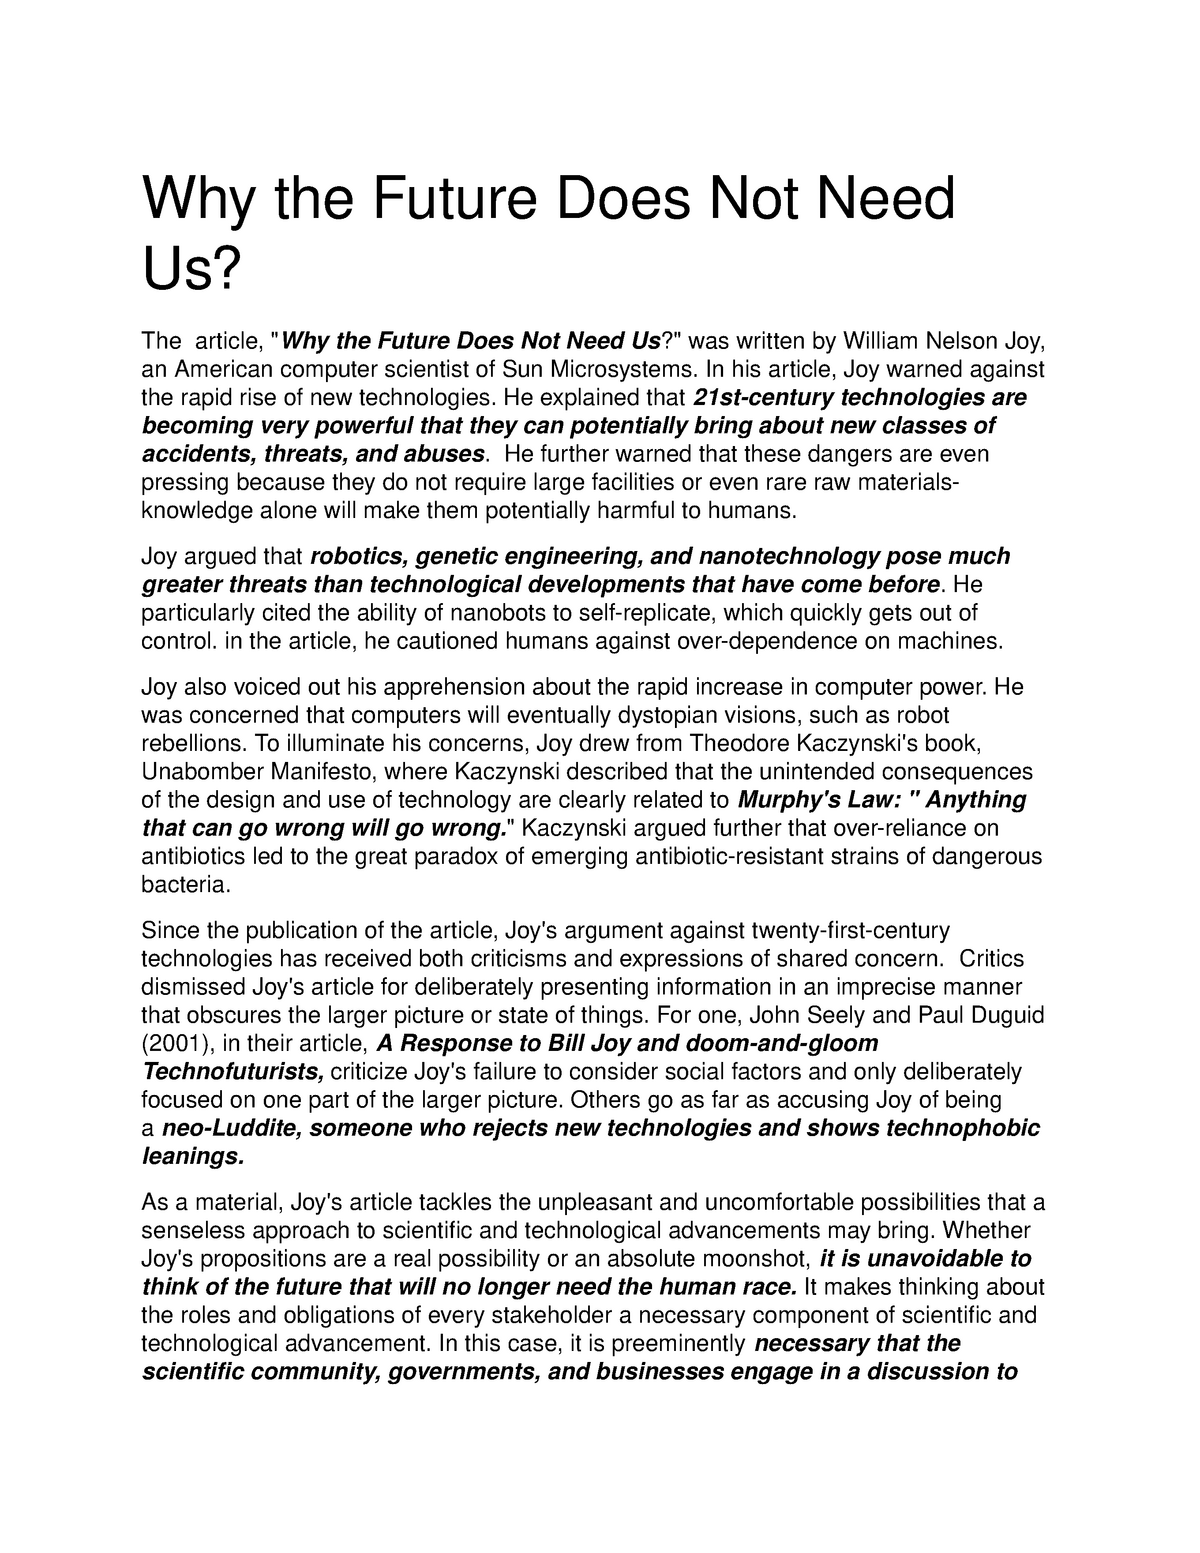 essay about why the future doesn't need us